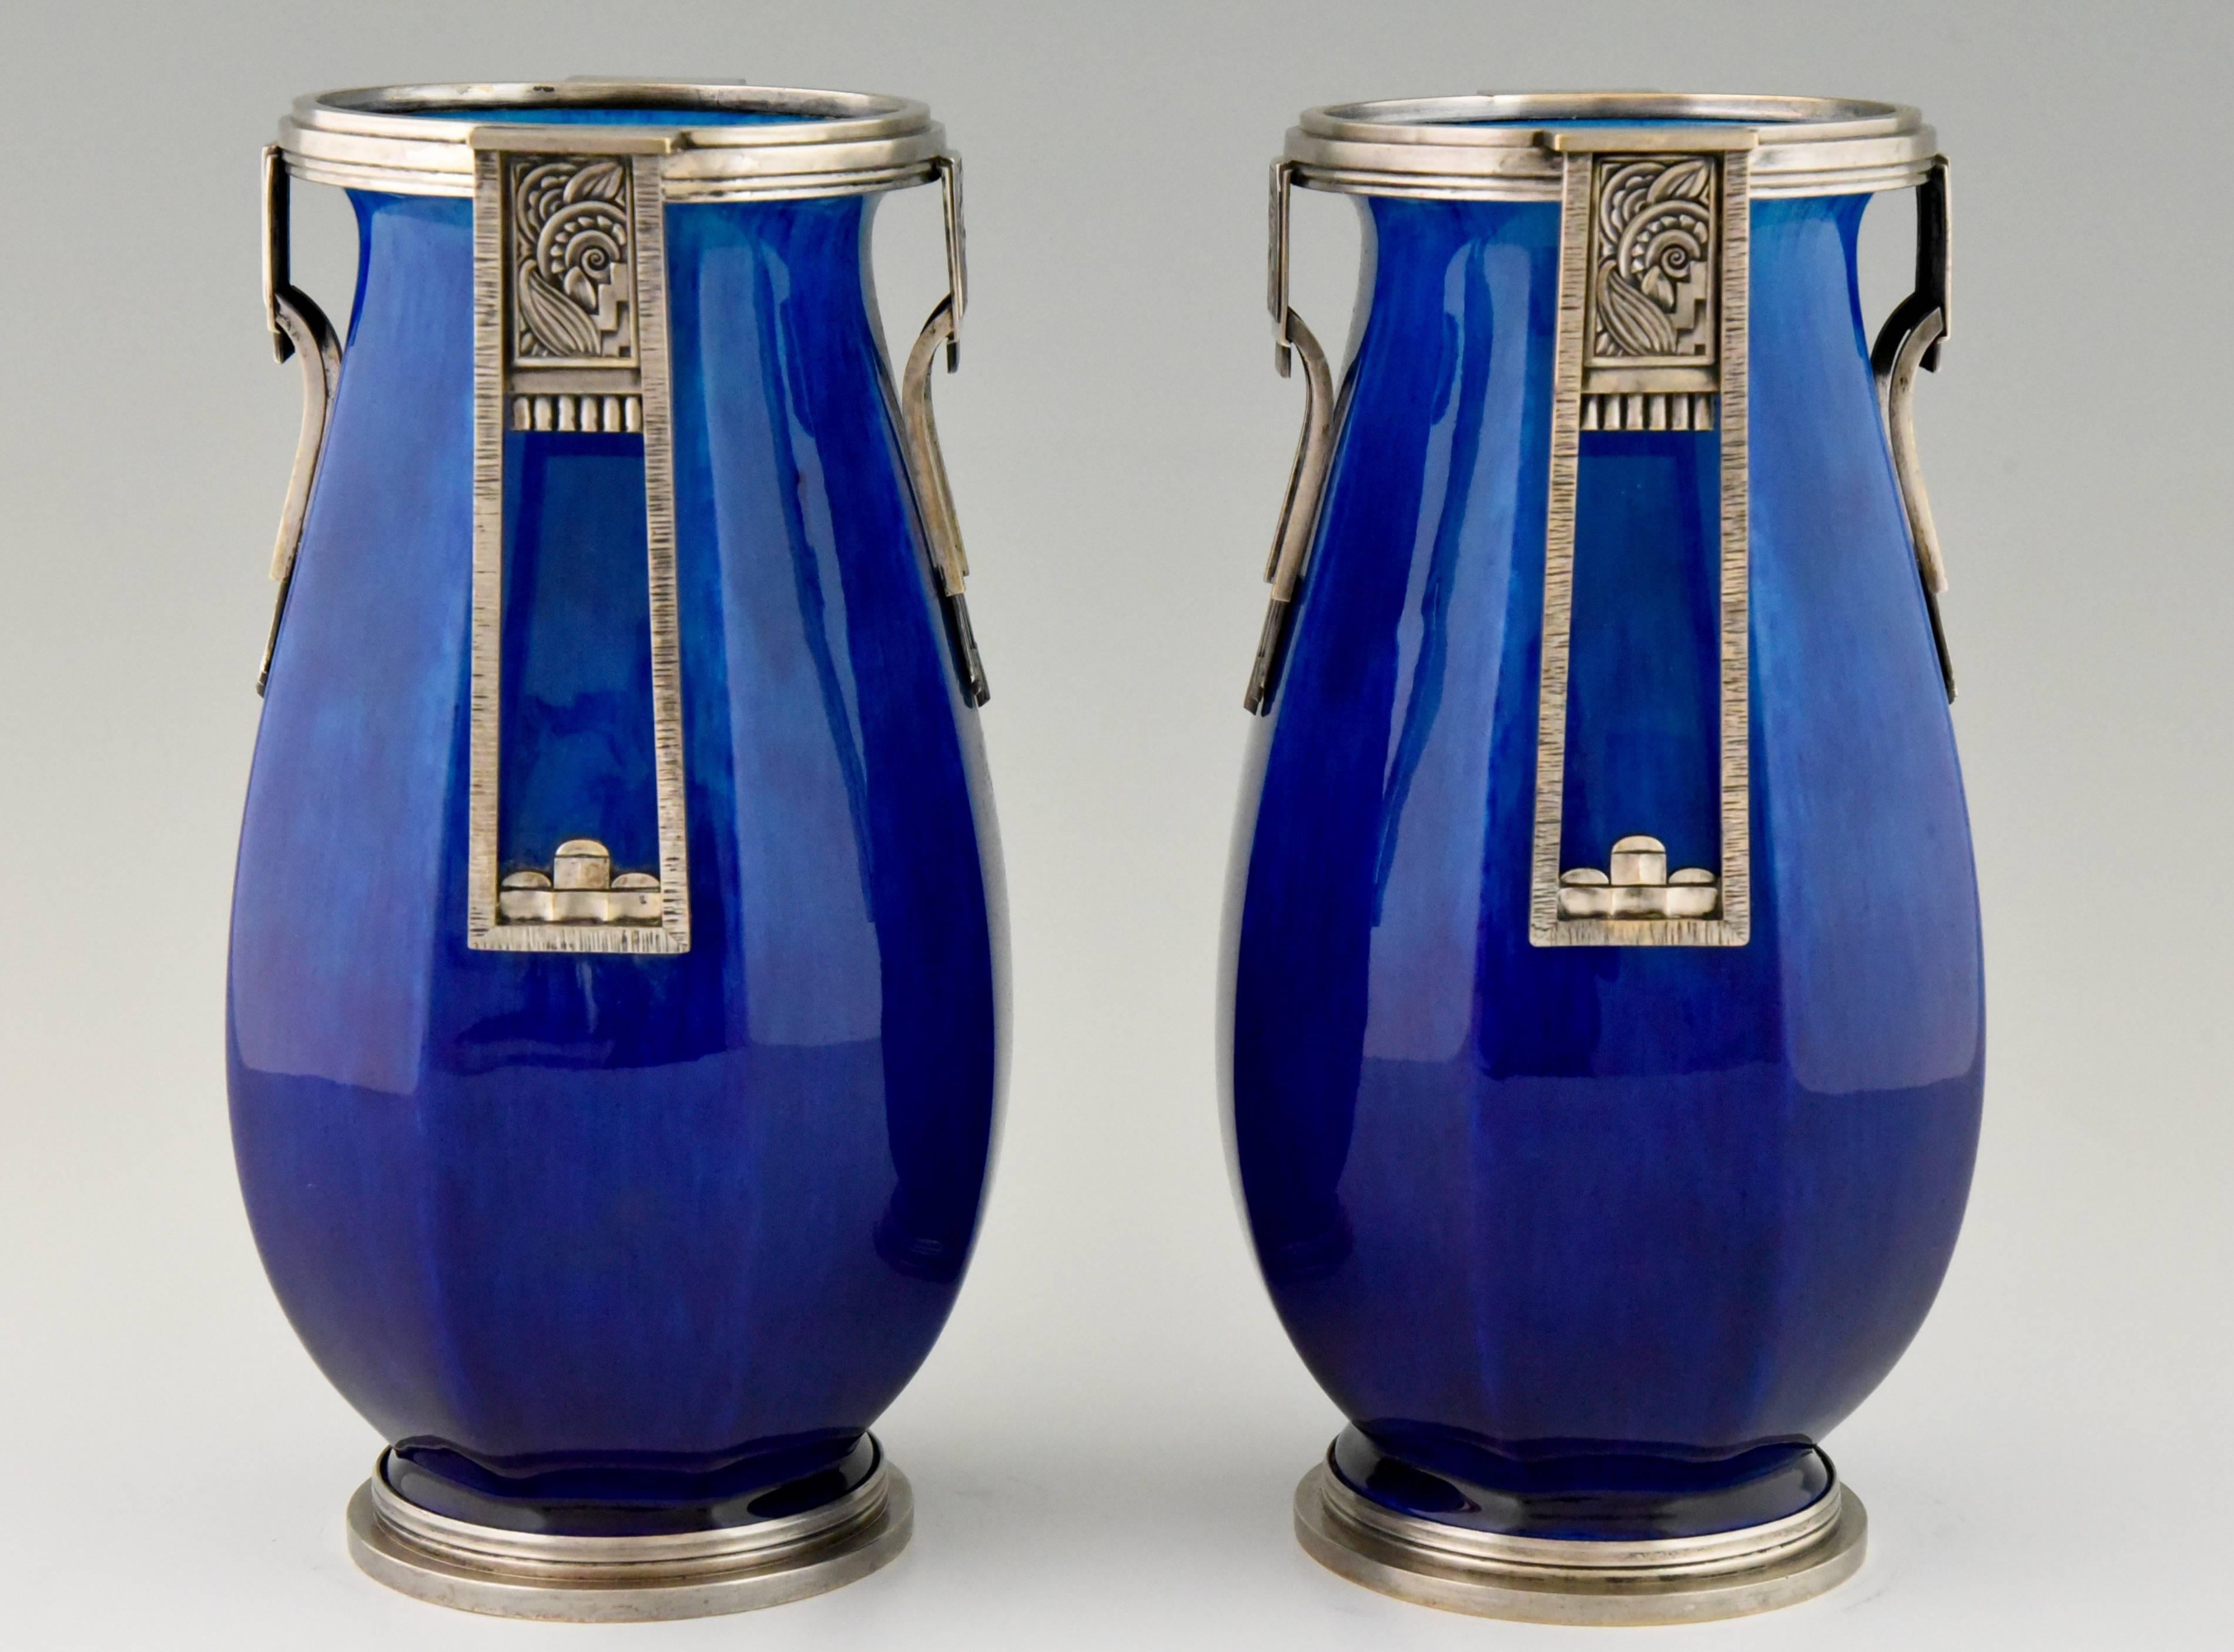 A pair of French Art Deco ceramic vases with blue glaze and silvered bronze decorations. Artist / Maker:  Paul Milet (1870-1950) son of Optat Milet. Maker:  Sèvres. Signature/ Marks:  MP and Sèvres dotted circle logo. Style: Art Deco. Date: 1925.